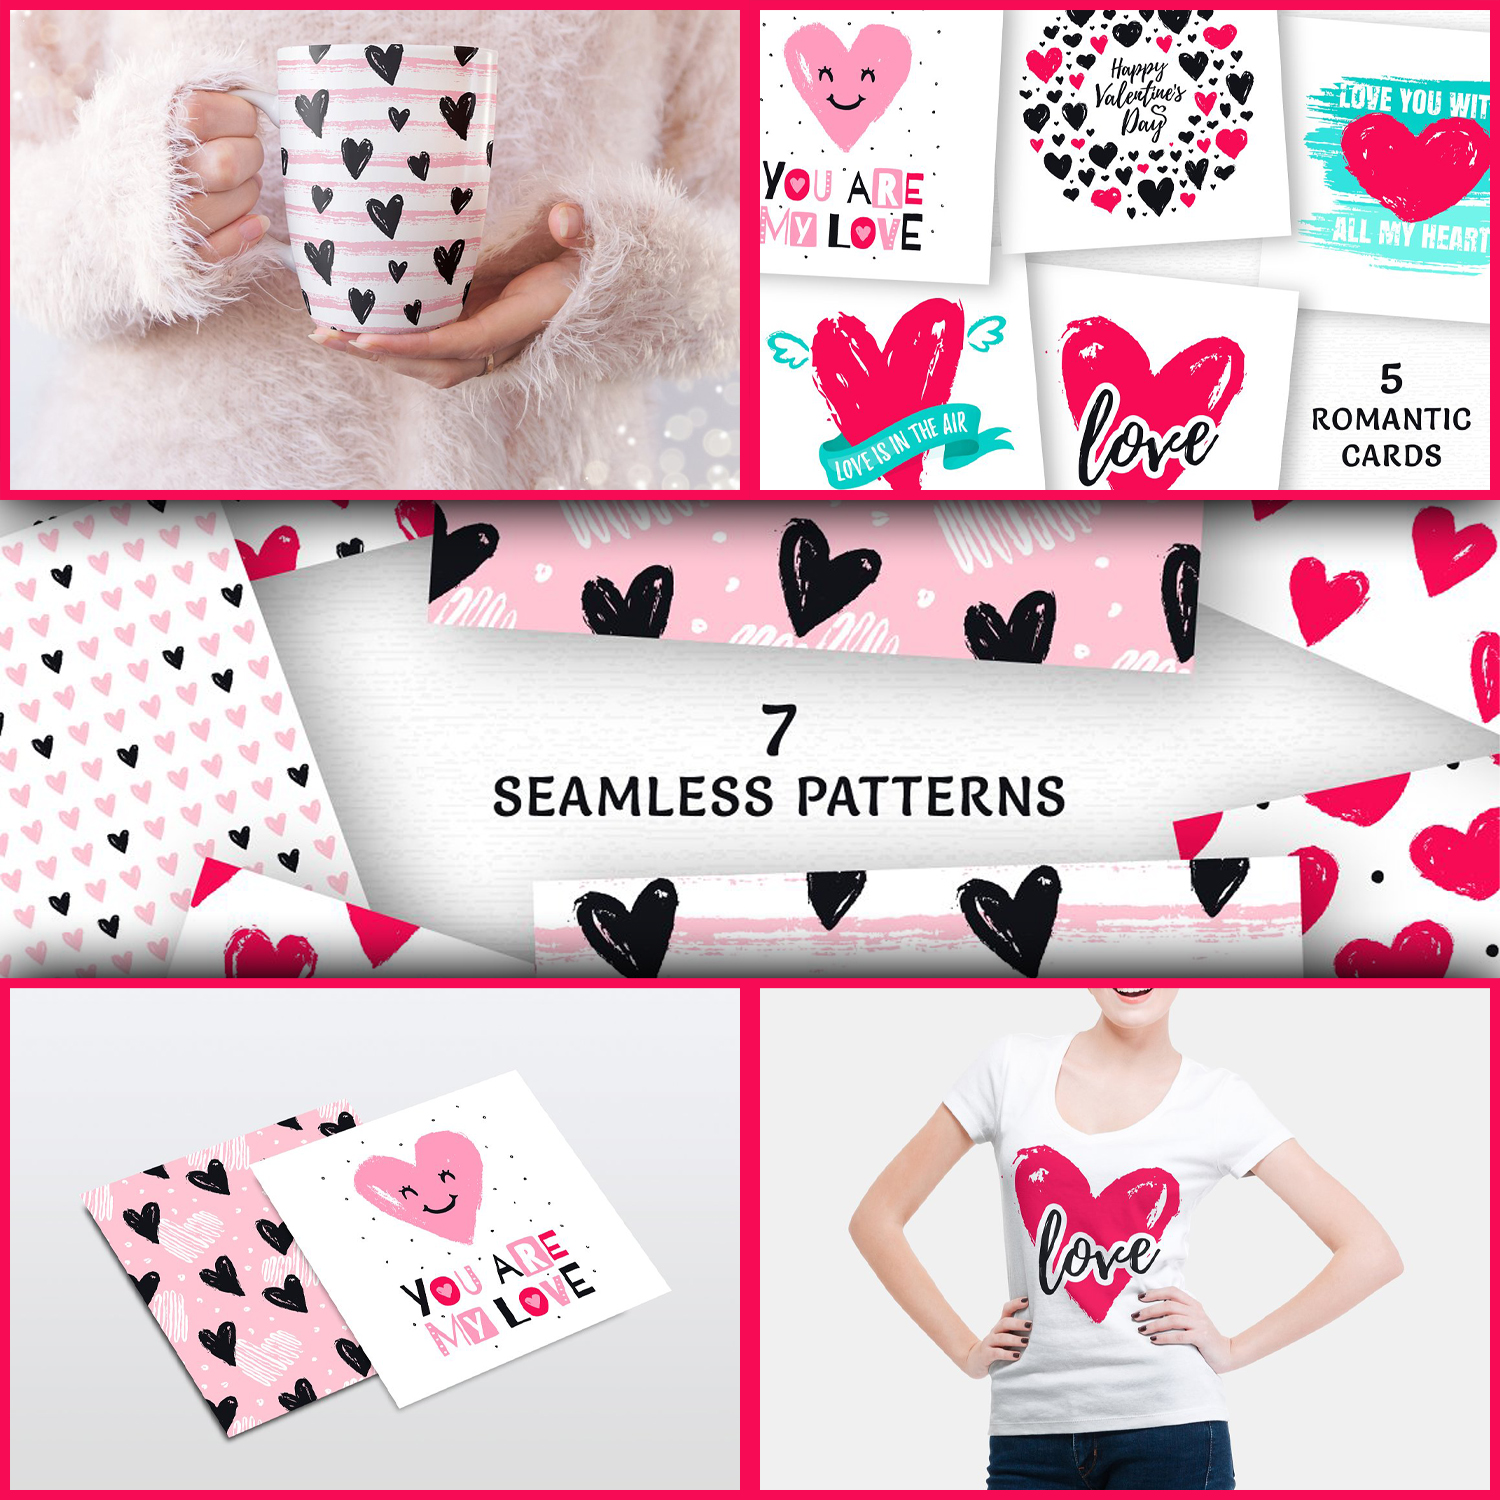 Preview hand drawn hearts big collection.